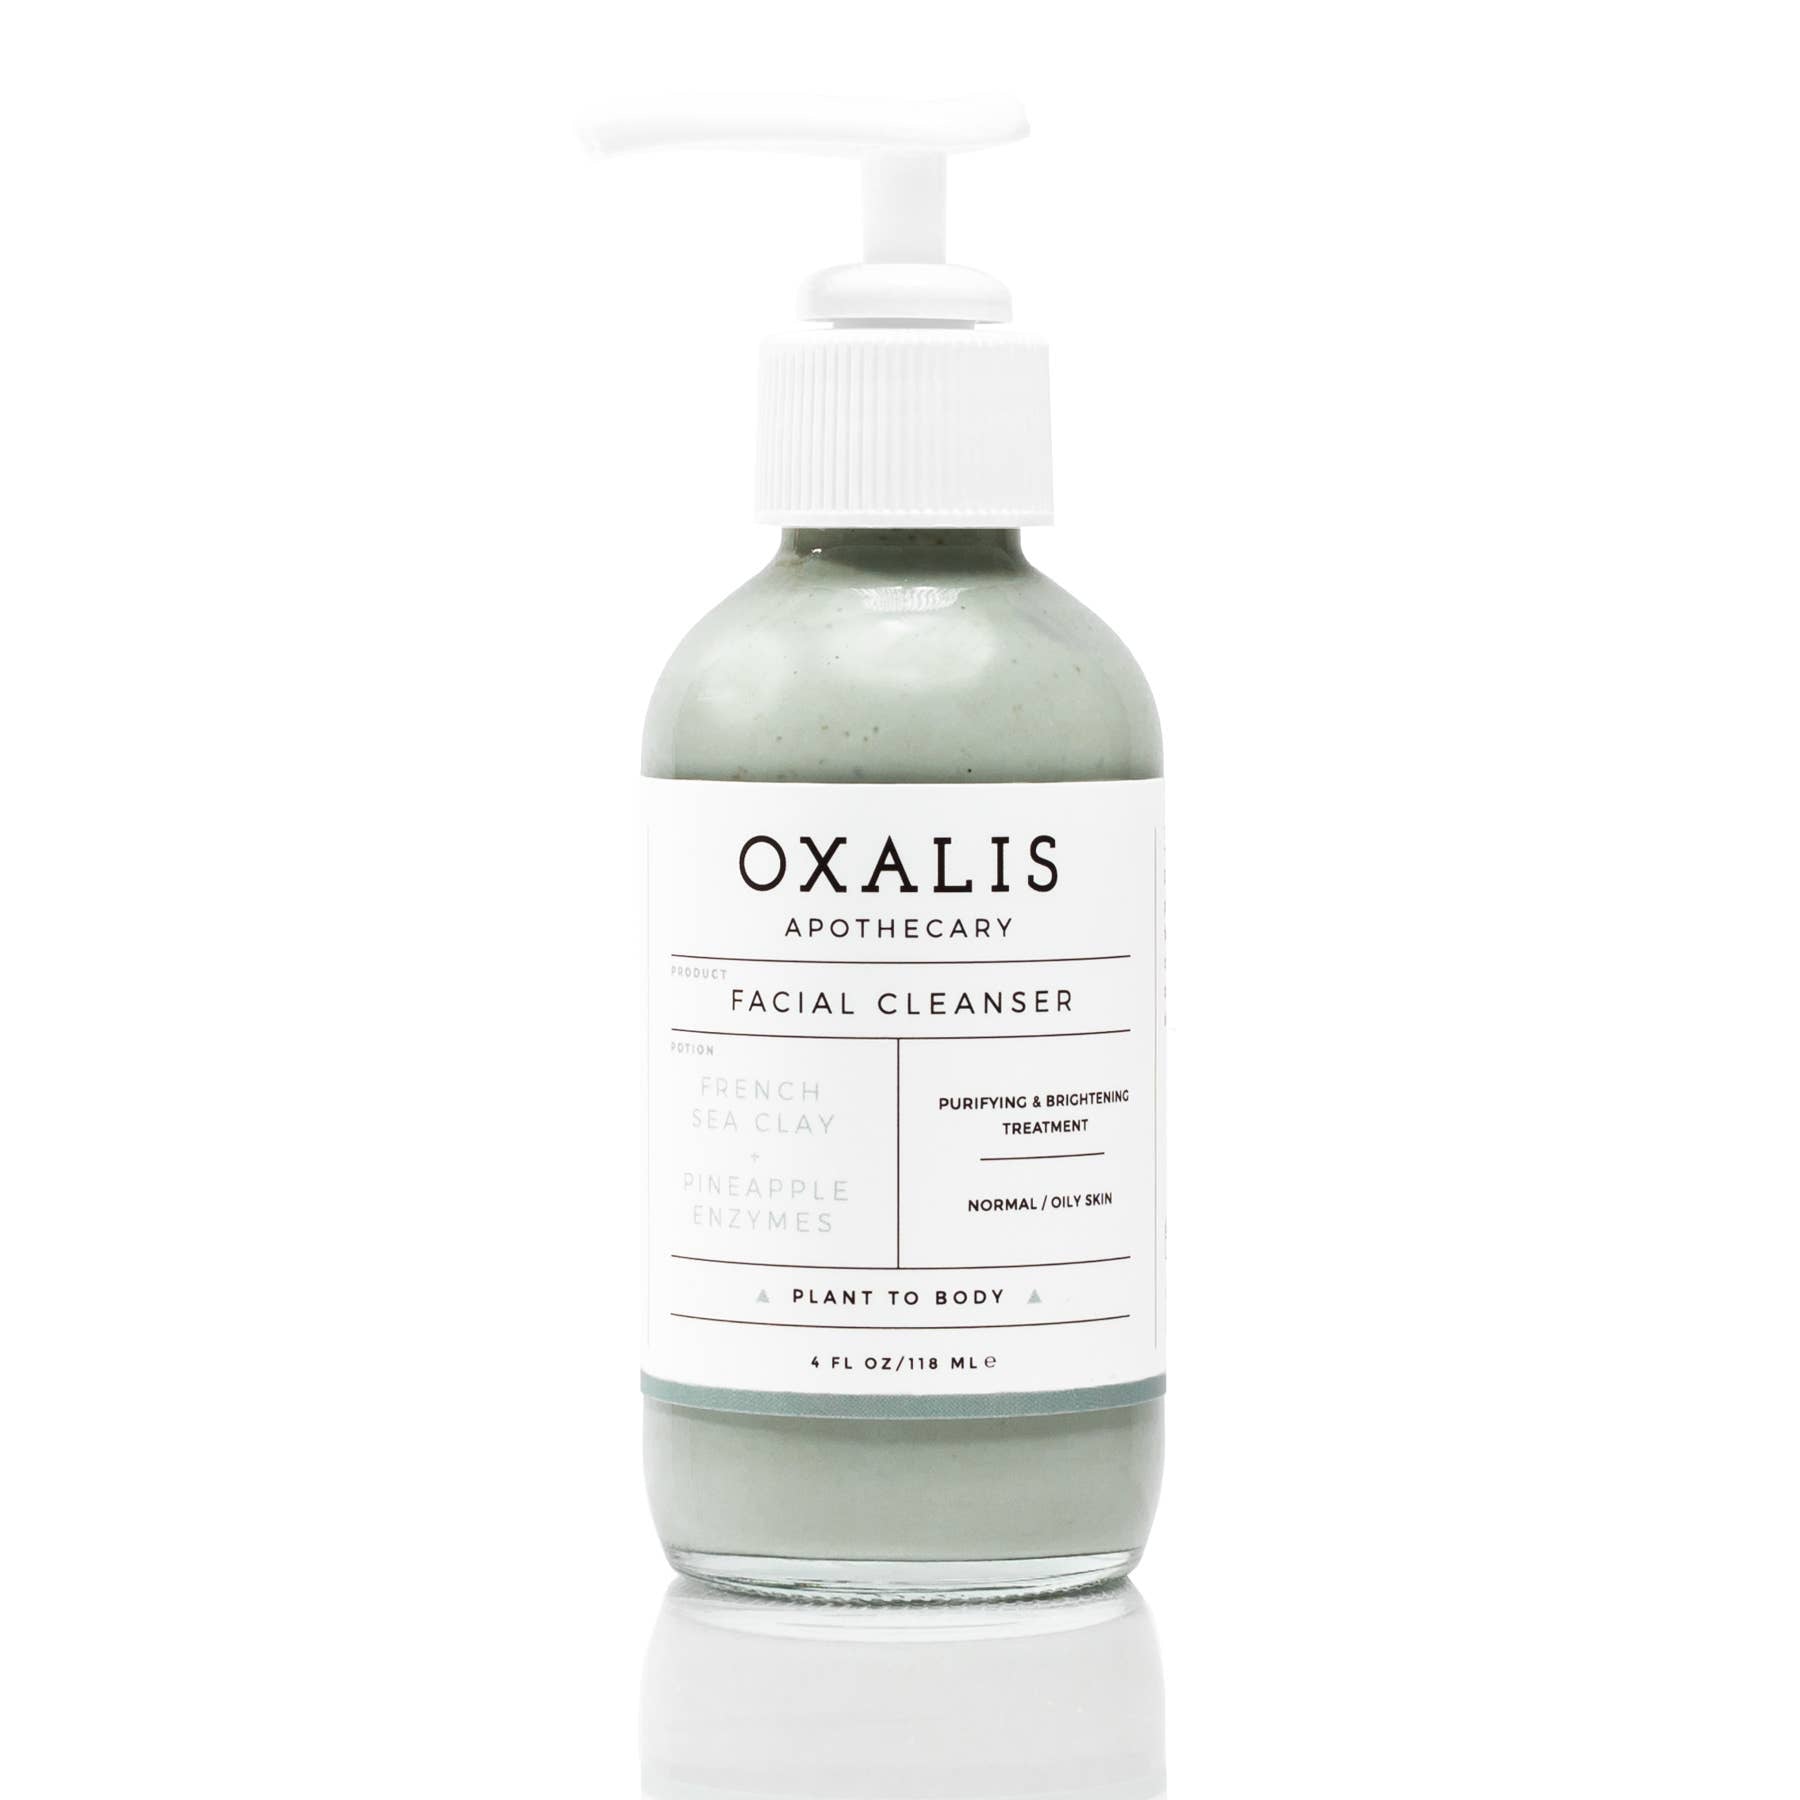 Oxalis Apothecary - French Sea Clay + Pineapple Enymes Facial Cleanser